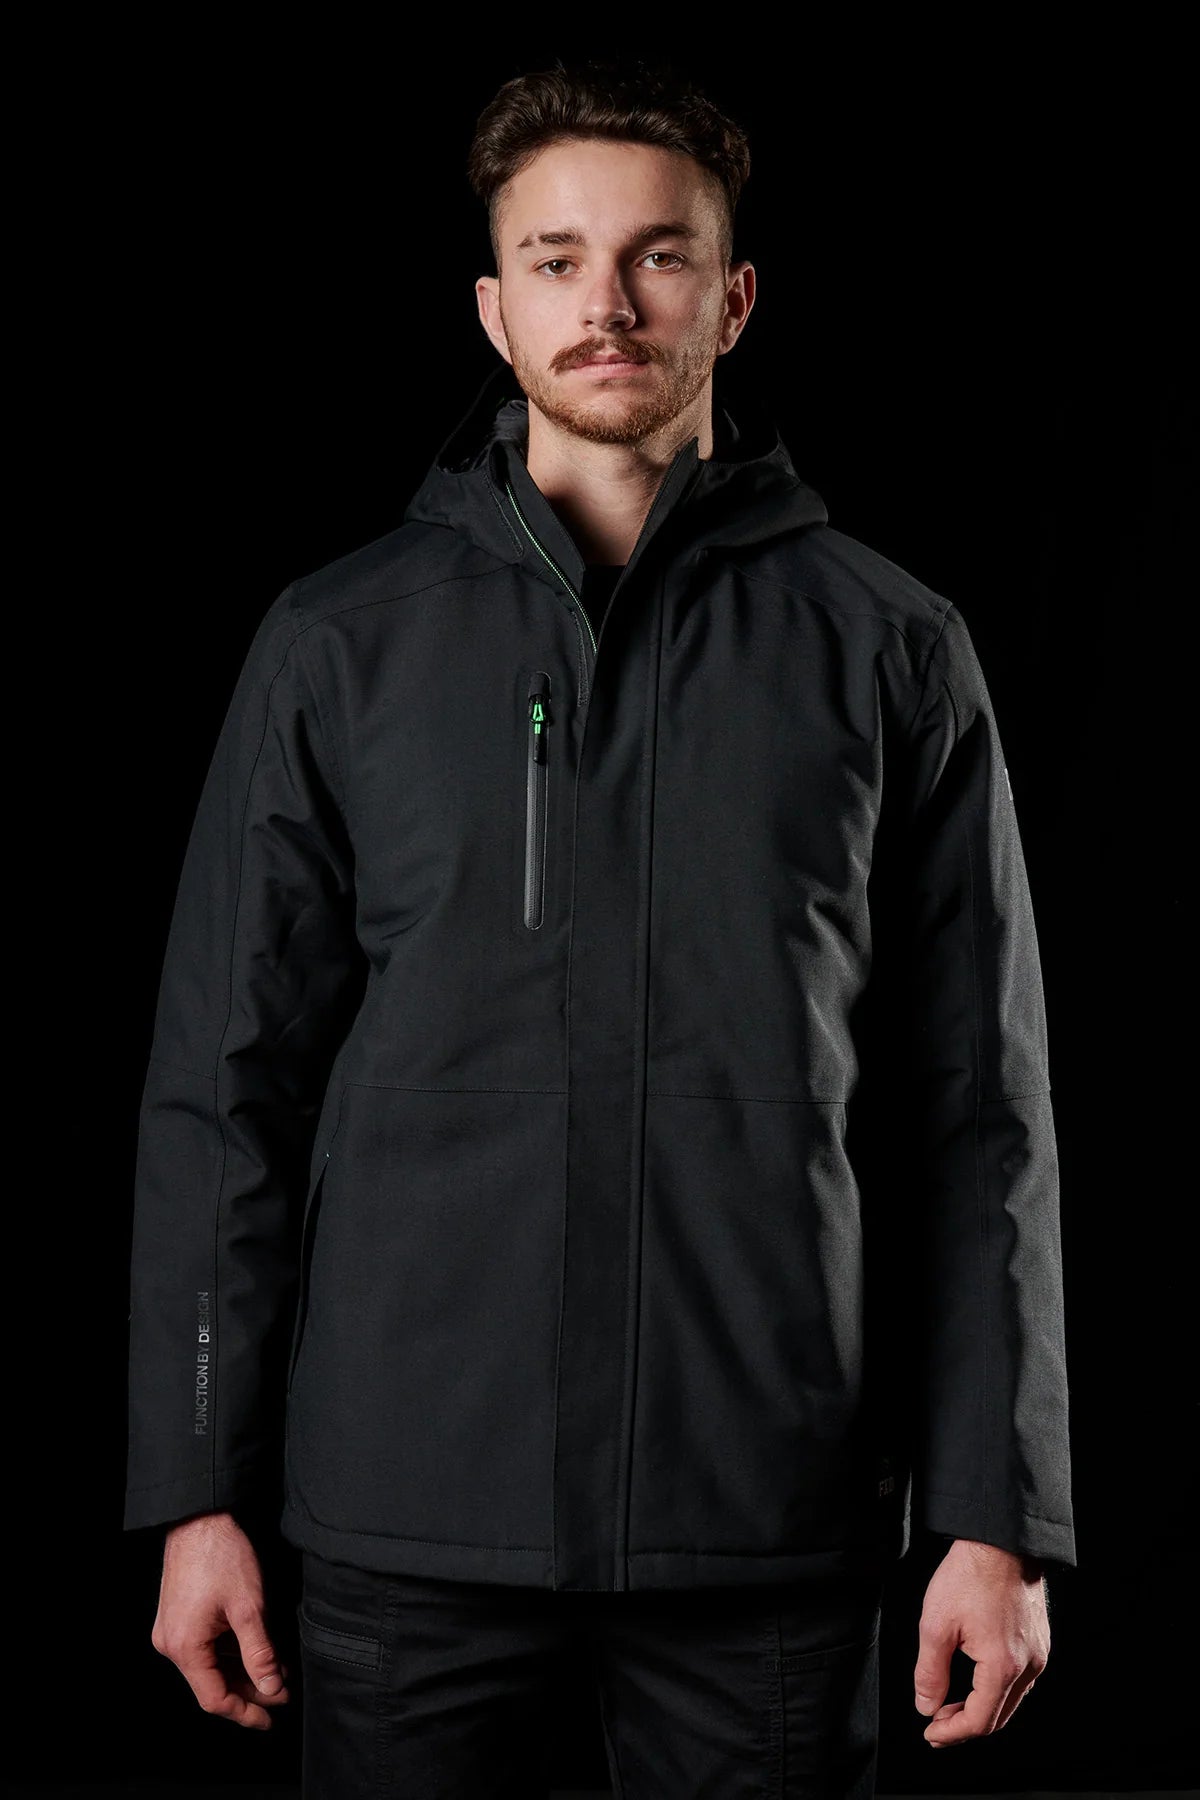 FXD WO-1 Insulated Work Jacket in Black